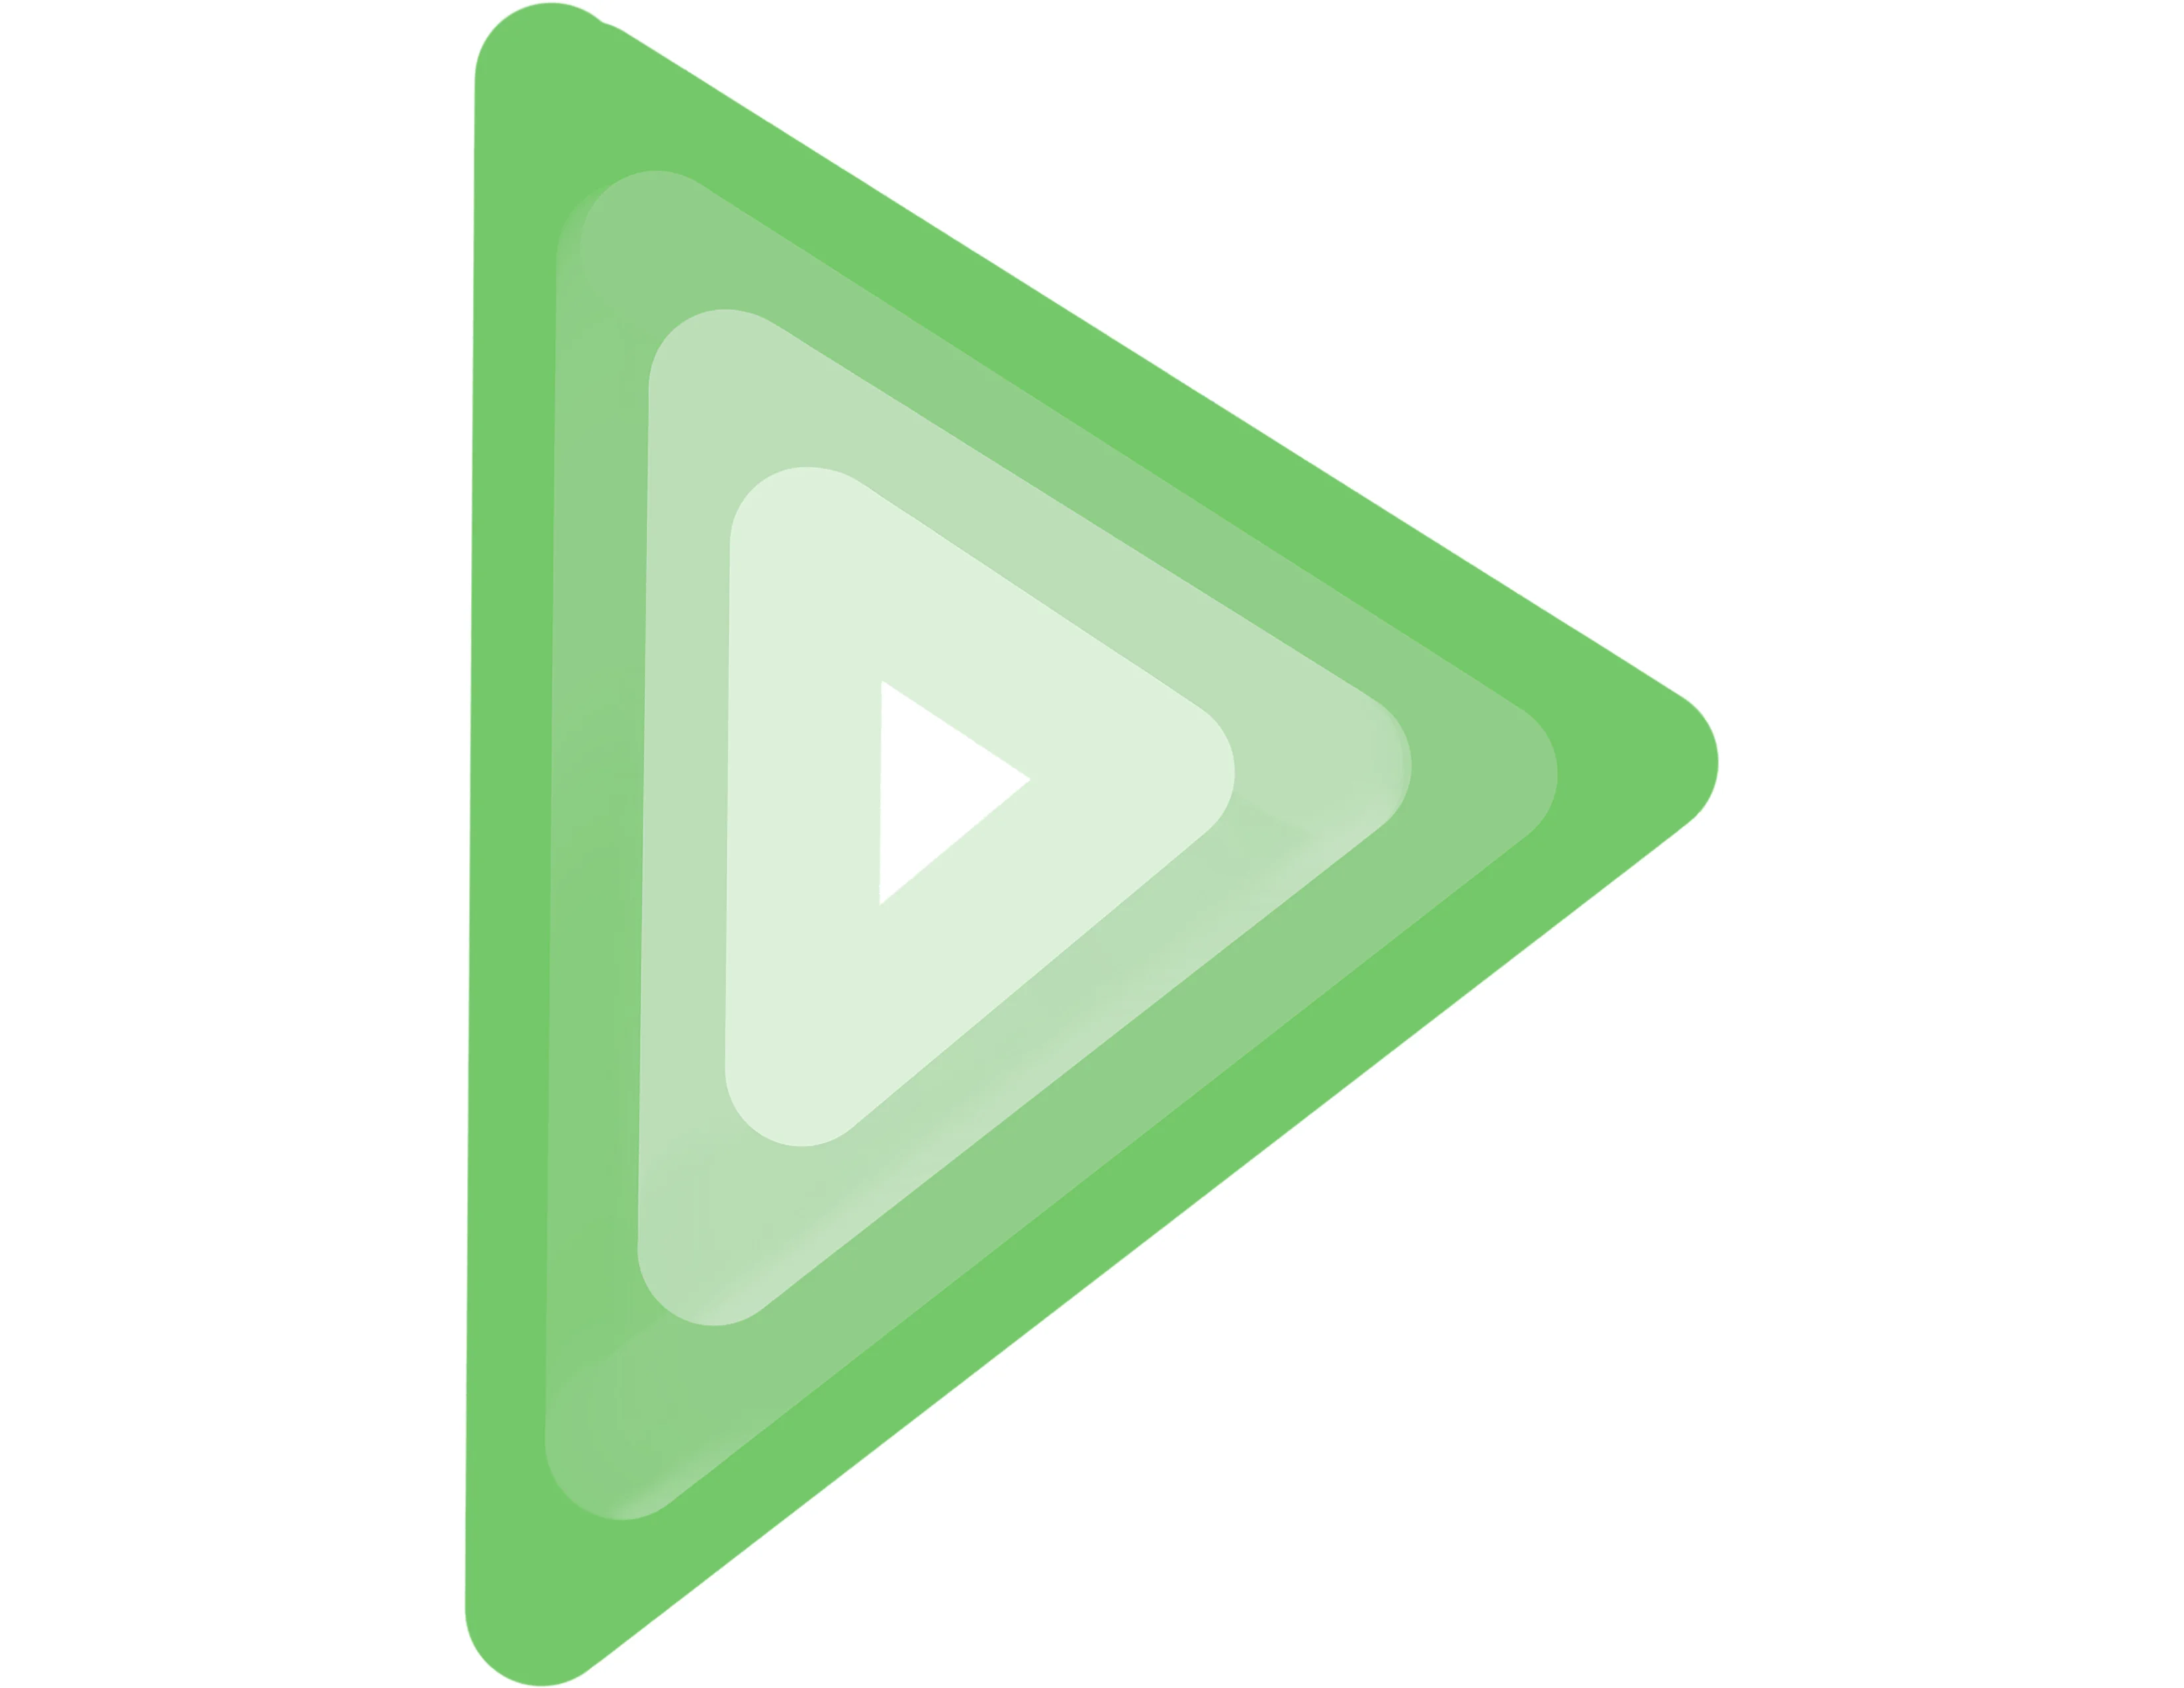 Image of a green play button